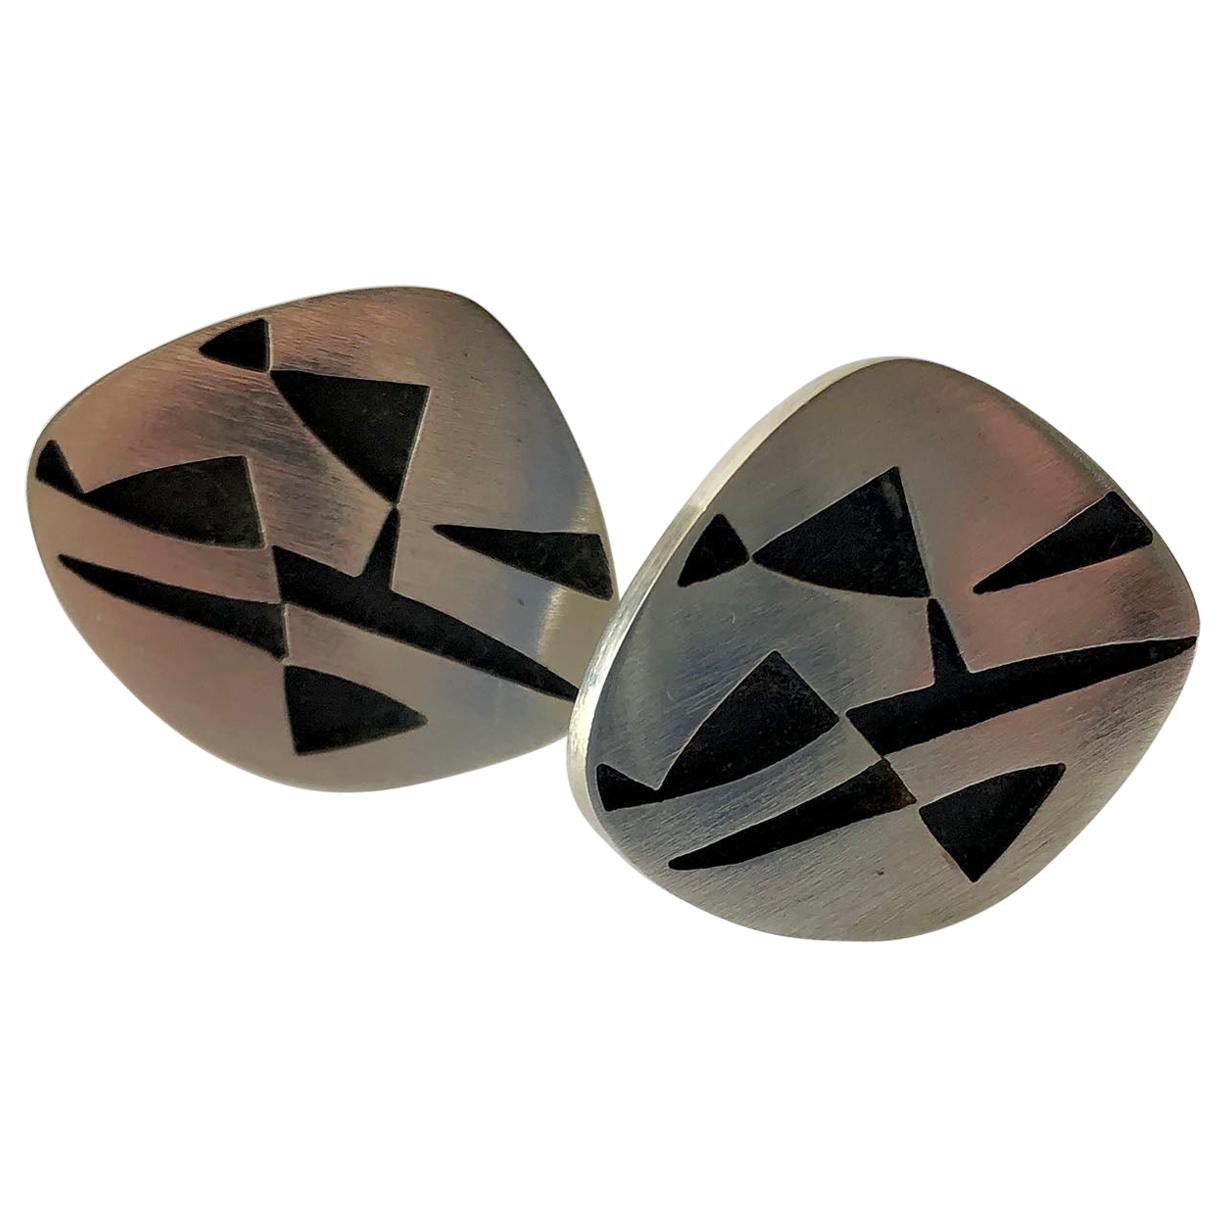 Rotter Sterling Silver Geometric Abstract American Modernist Cufflinks